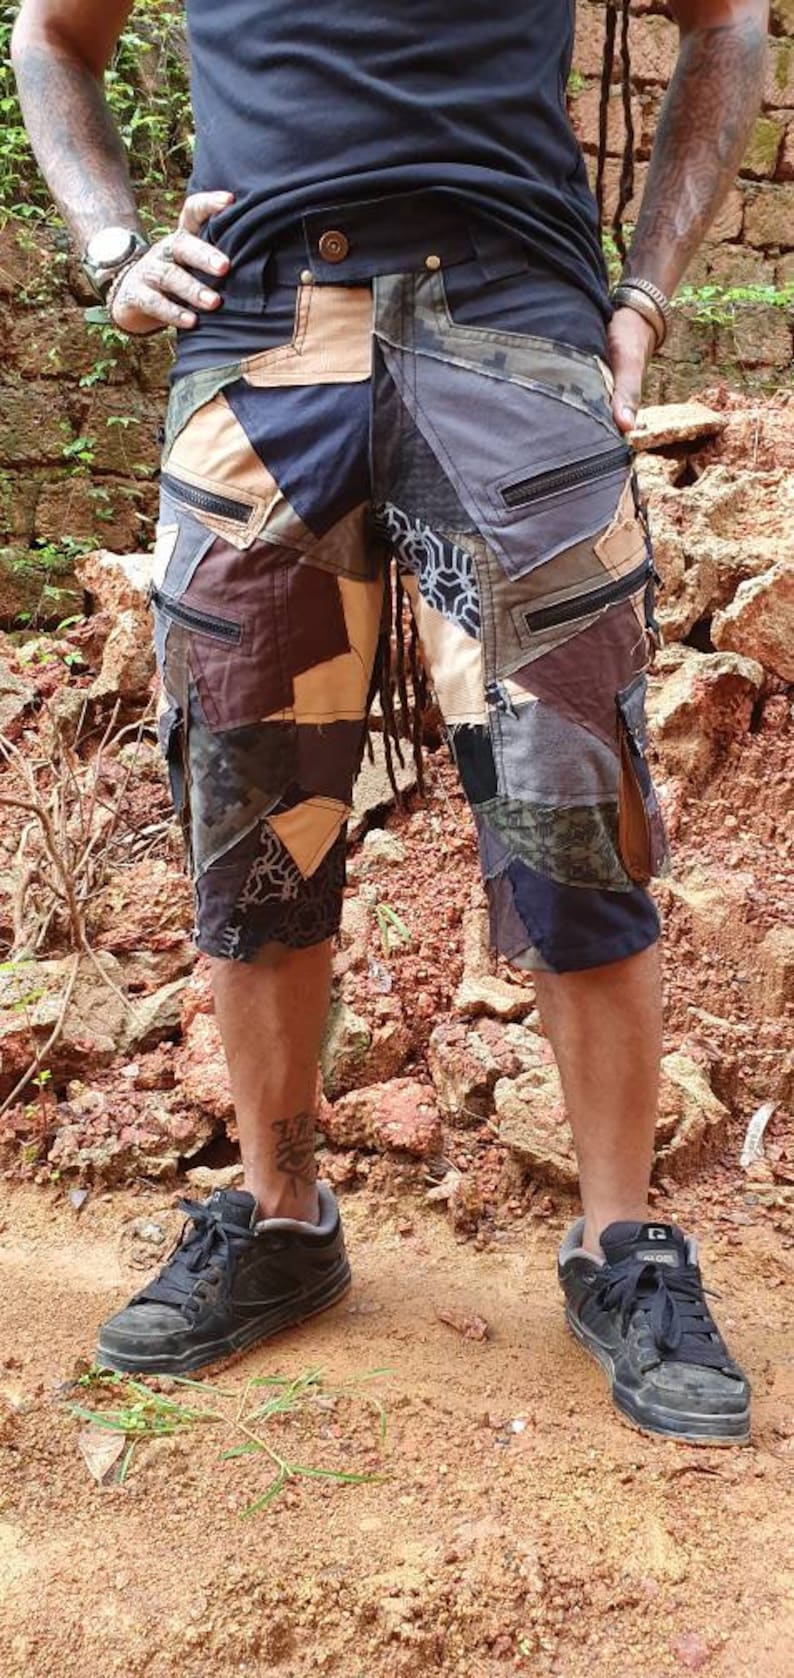 Skinner Men and women's cargo shorts, mens shorts, casual shorts with extra zips, steampunk, psytrance goa pants, wasteland weekend Junkyard Mix Colours